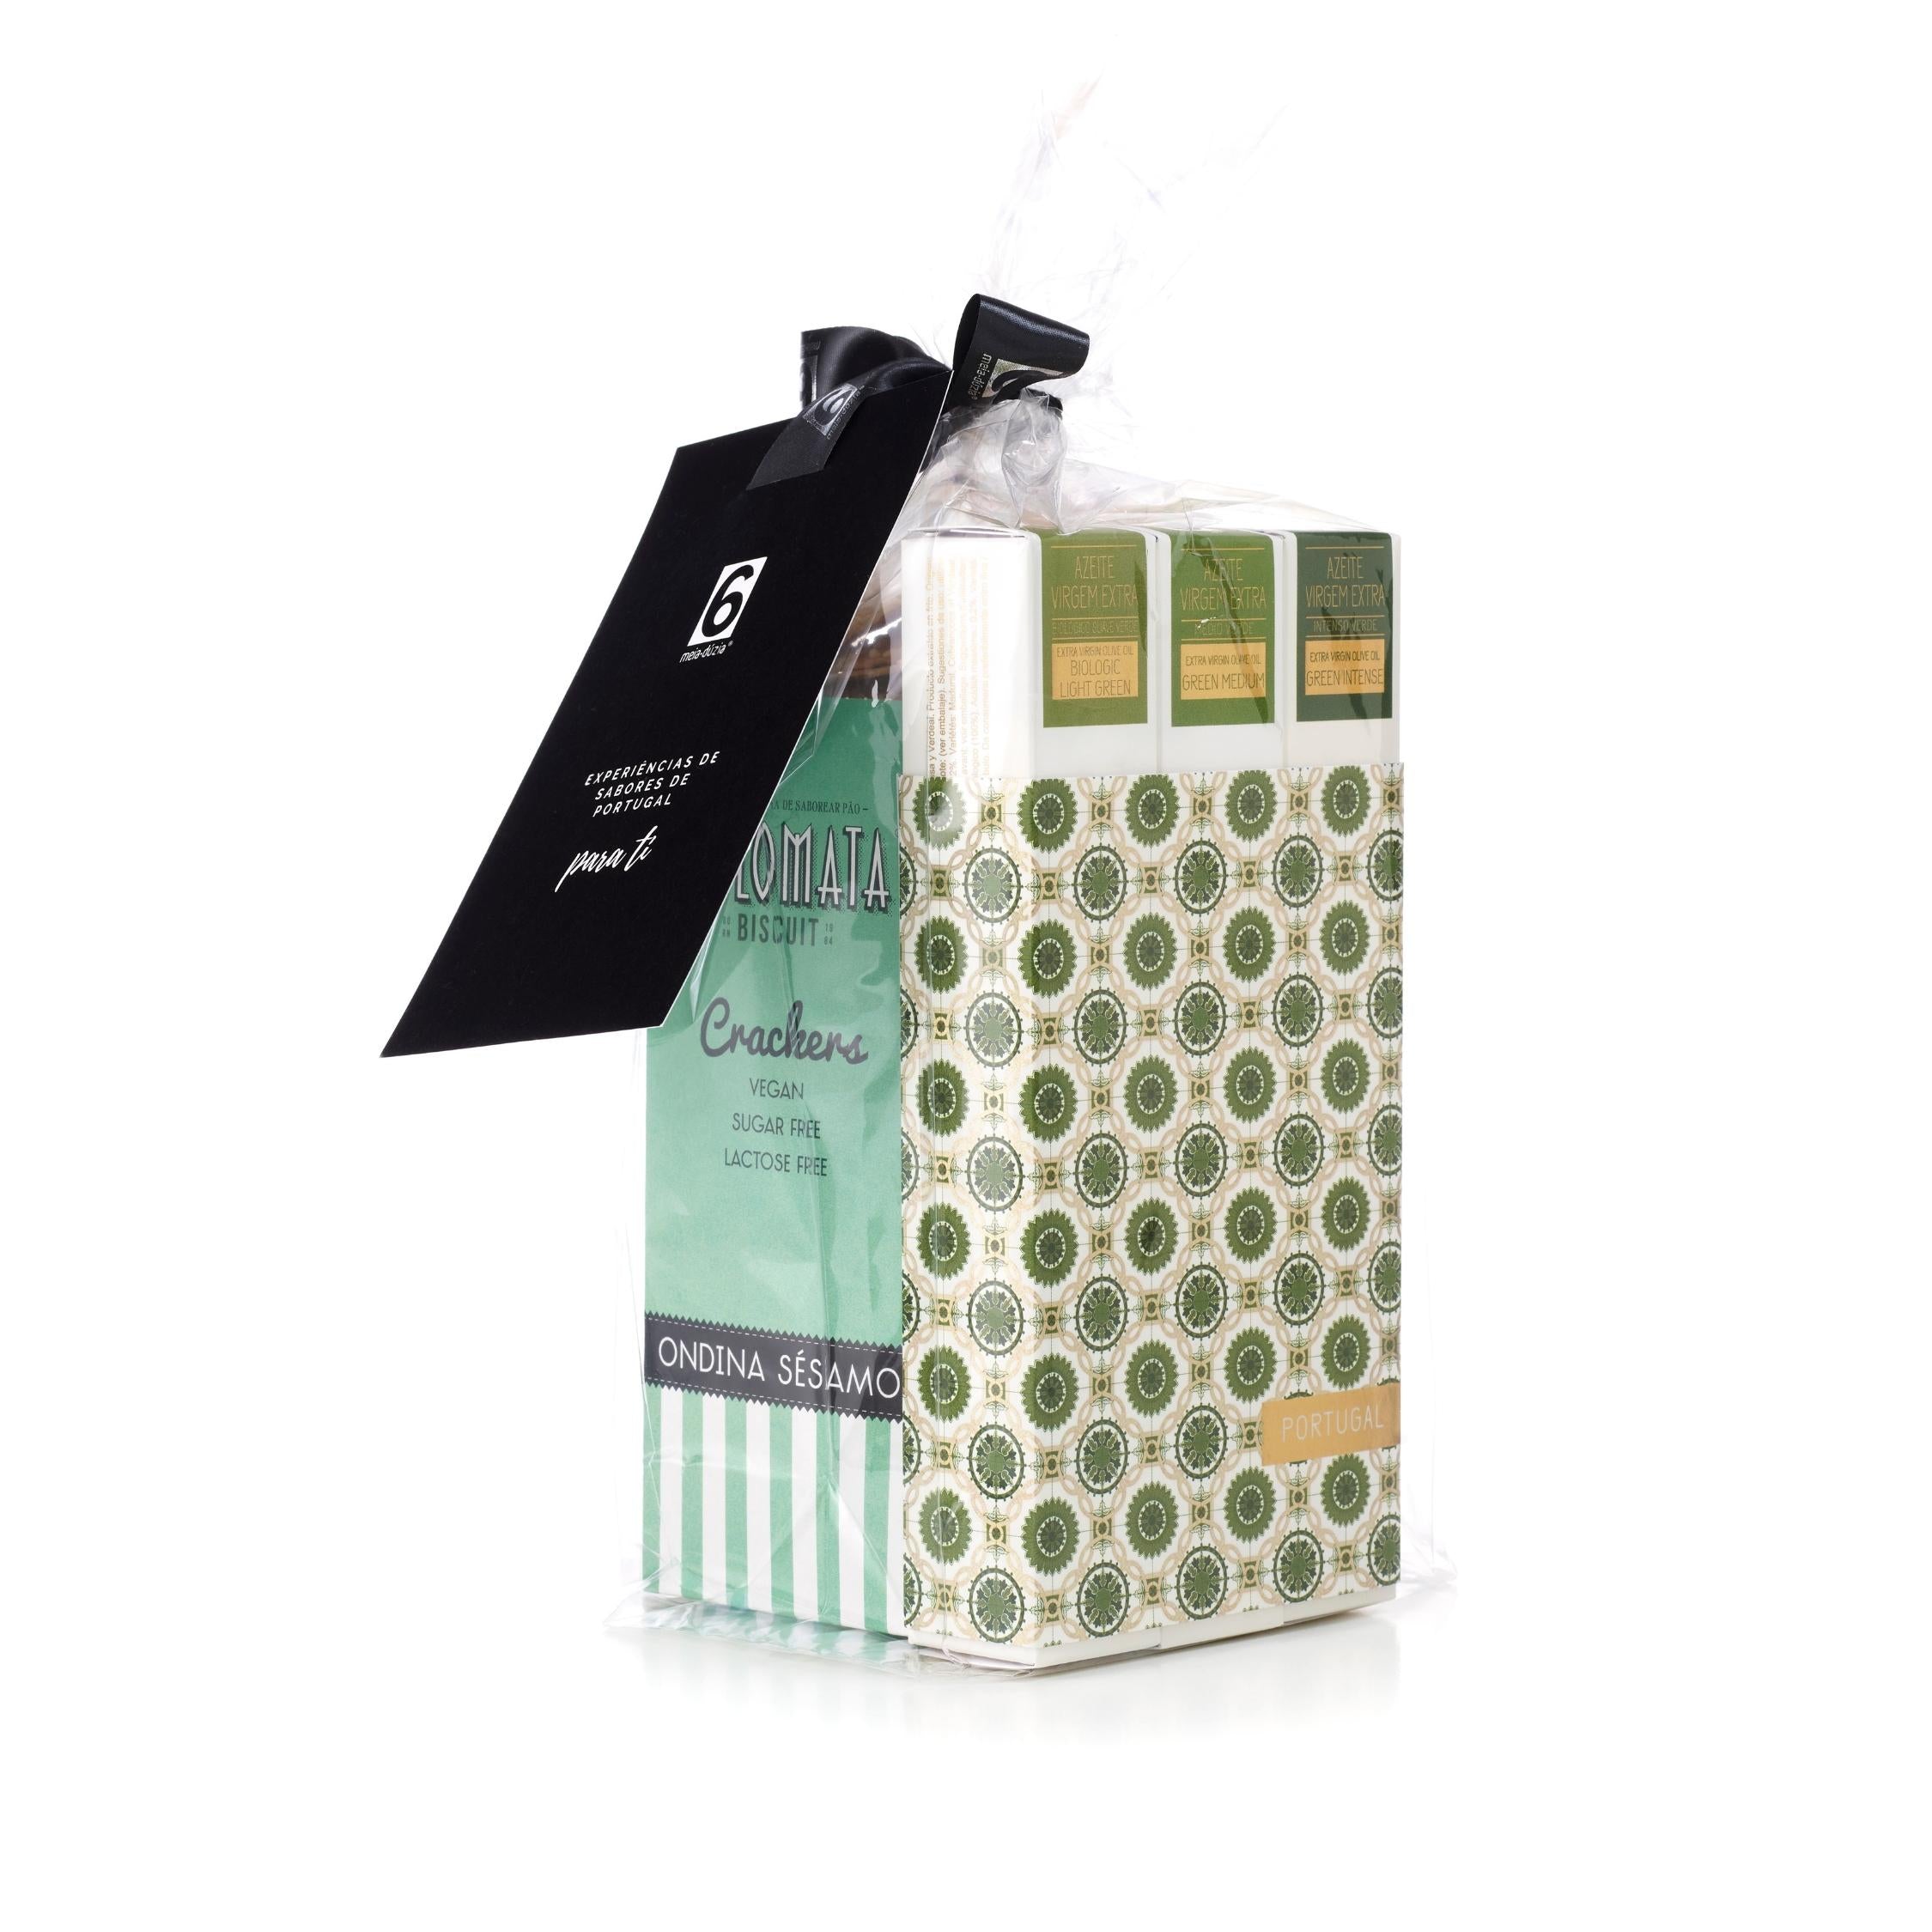 Experience Box: PACK 3 Green Olive Oils - Portuguese Tiles + Crackers